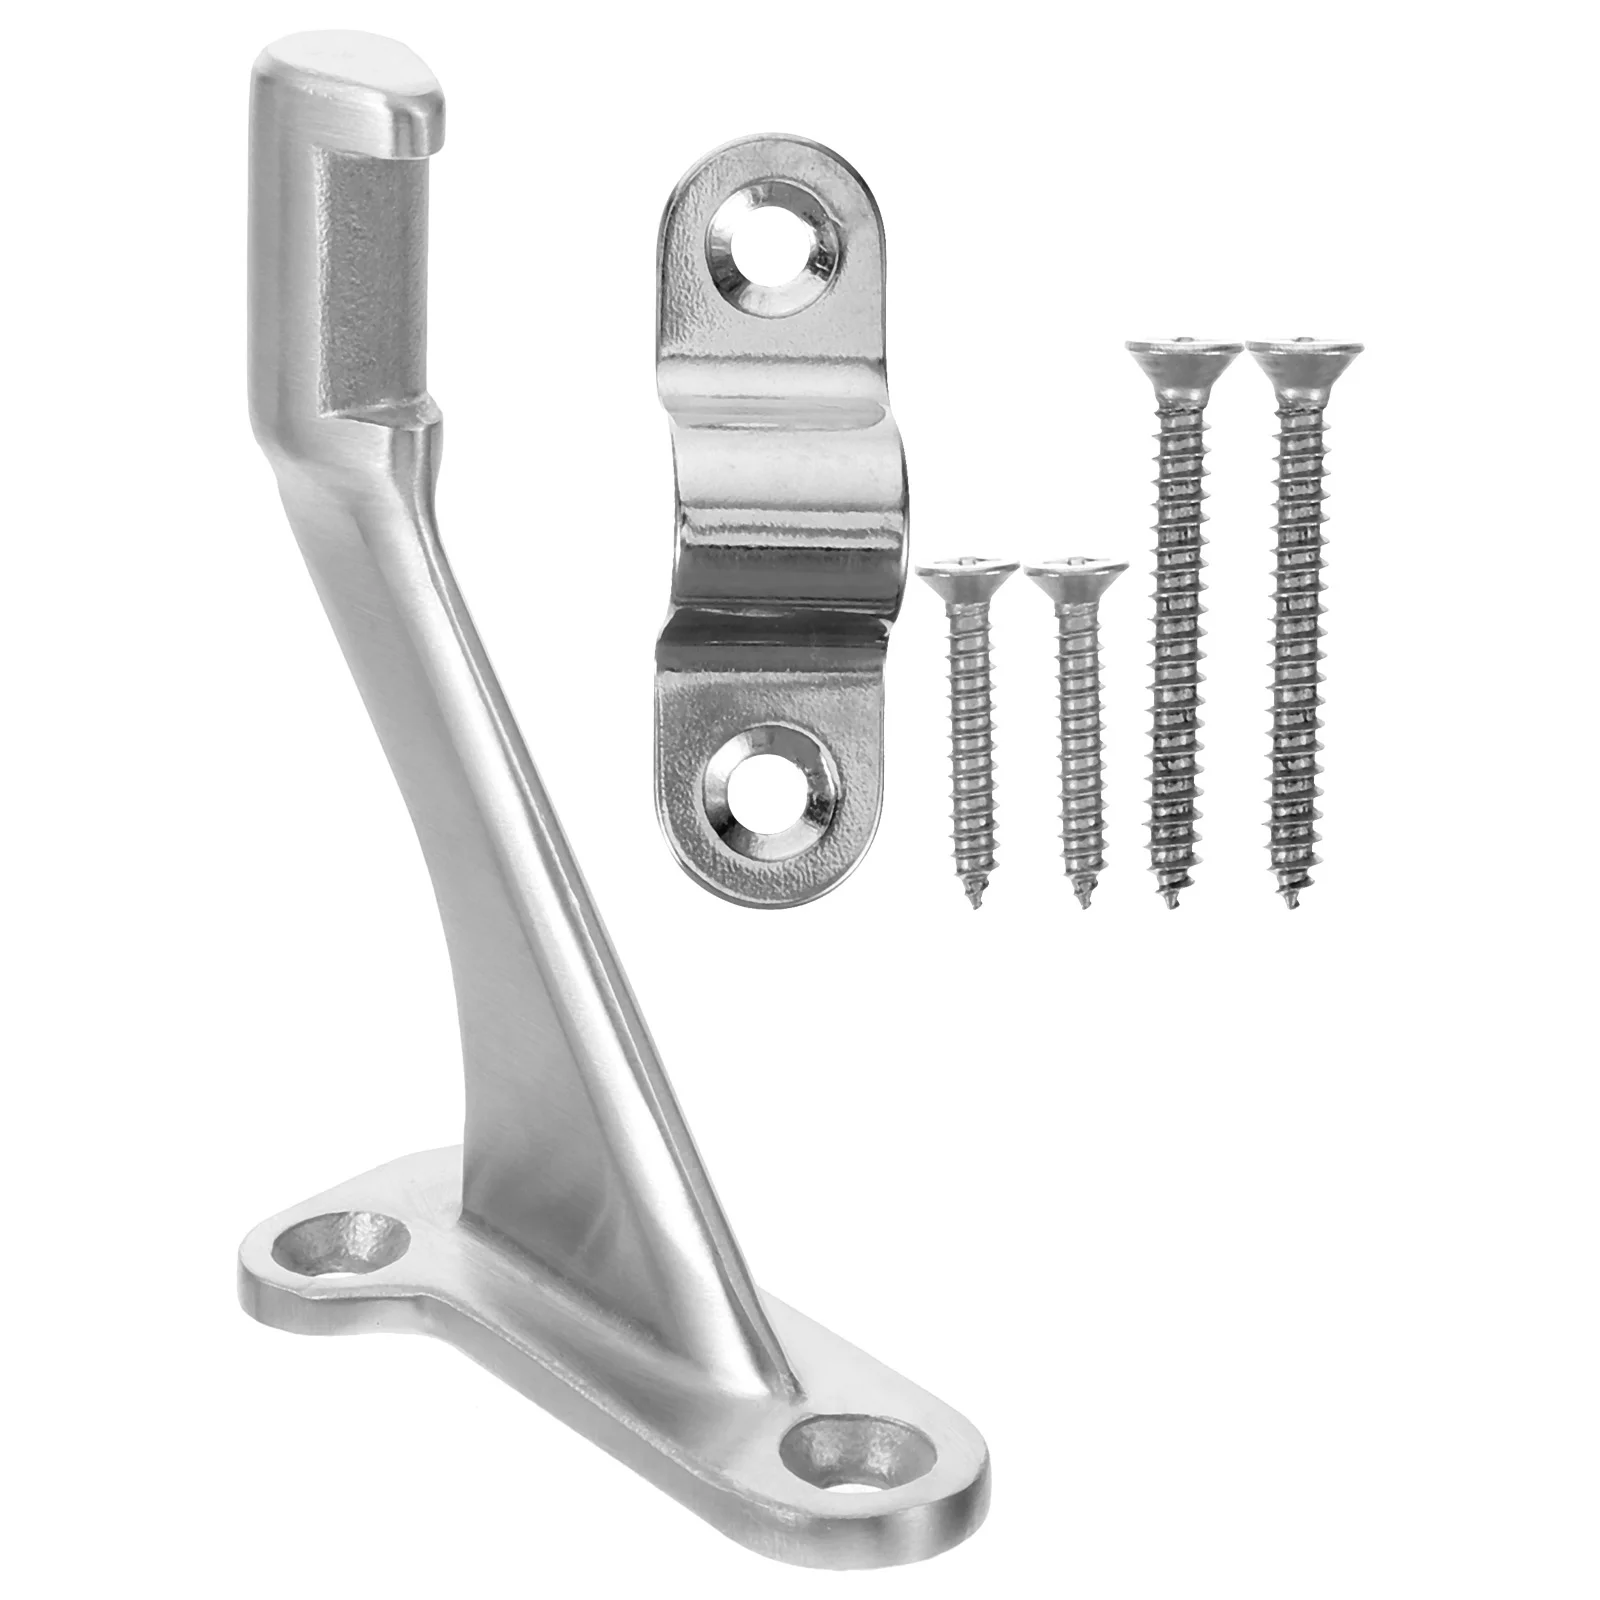 

Staircase Handrail Bracket Brackets for Stairs Rest Steps outside Railings Stairway Handrails Staircases